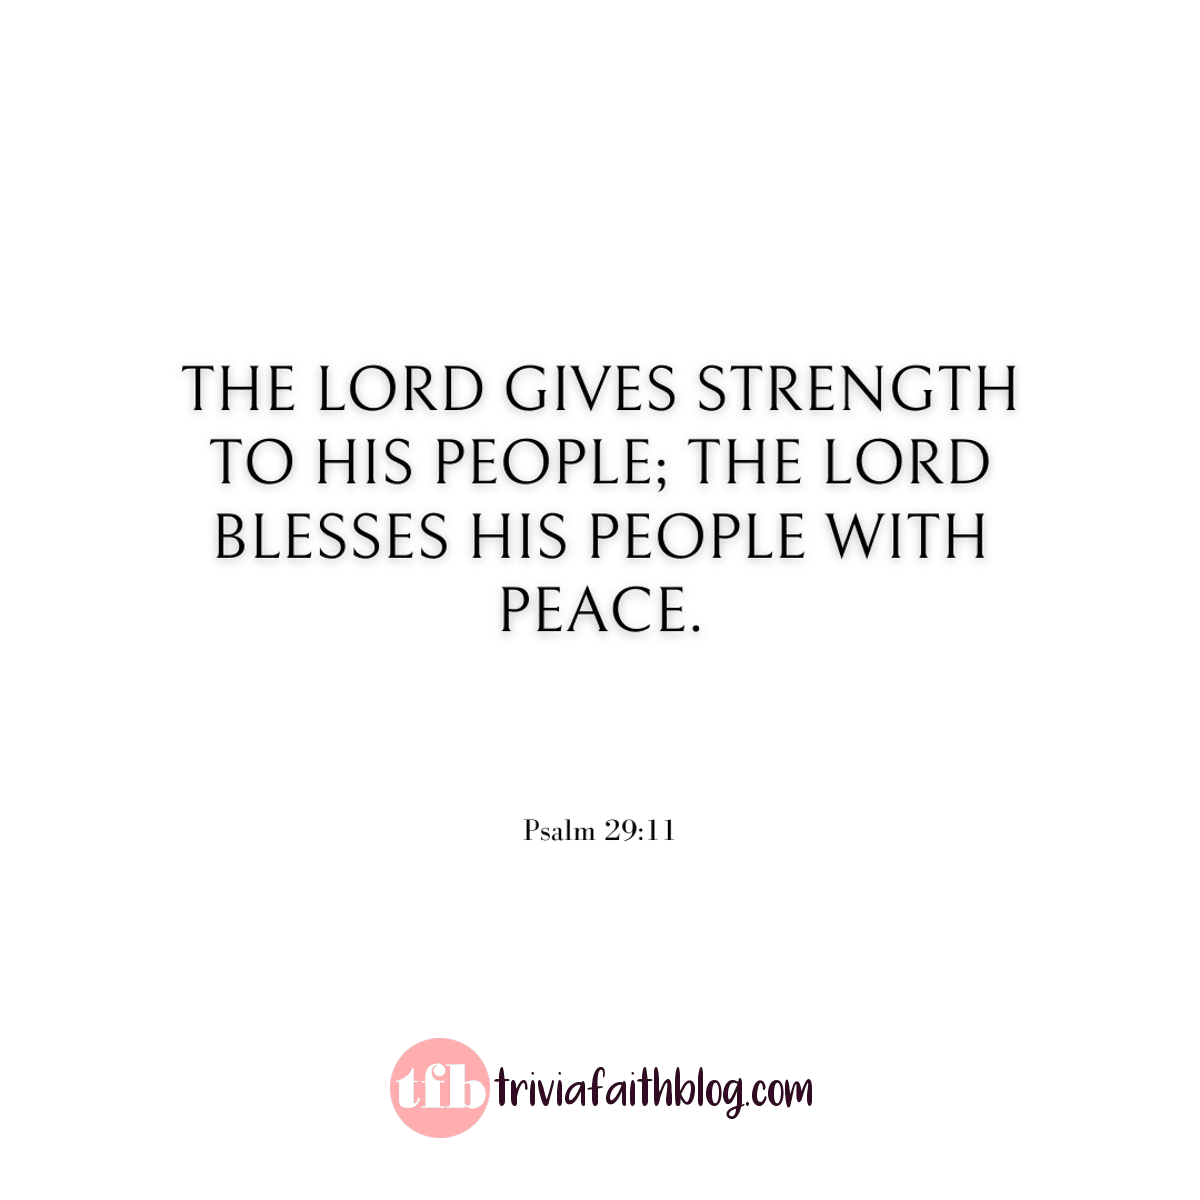 The Lord gives strength to his people; the Lord blesses his people with peace